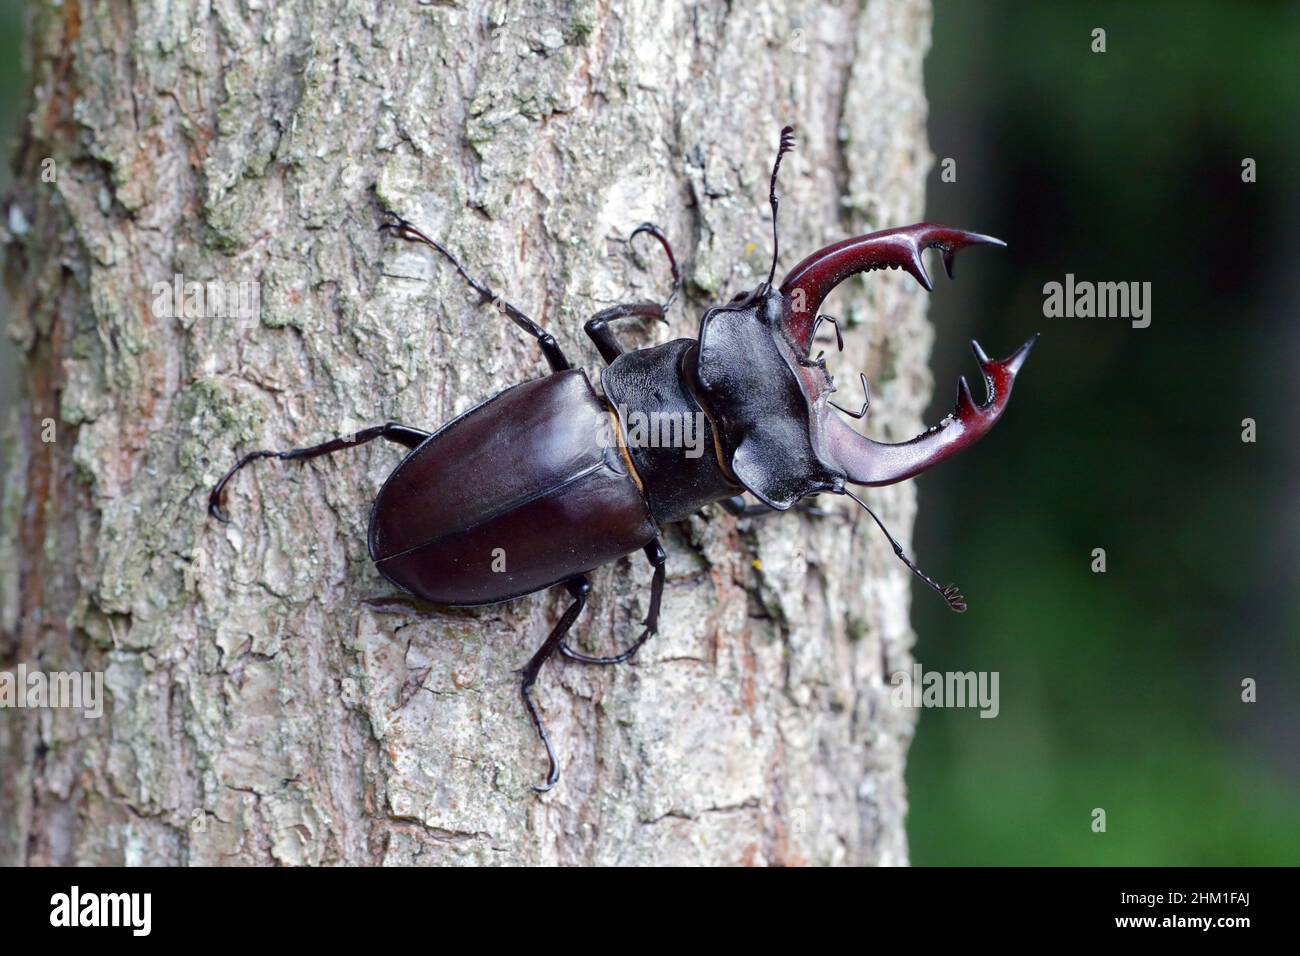 Closeup of a male of the European stag beetle, Lucanus servus. On the trunk of an oak tree. Stock Photo